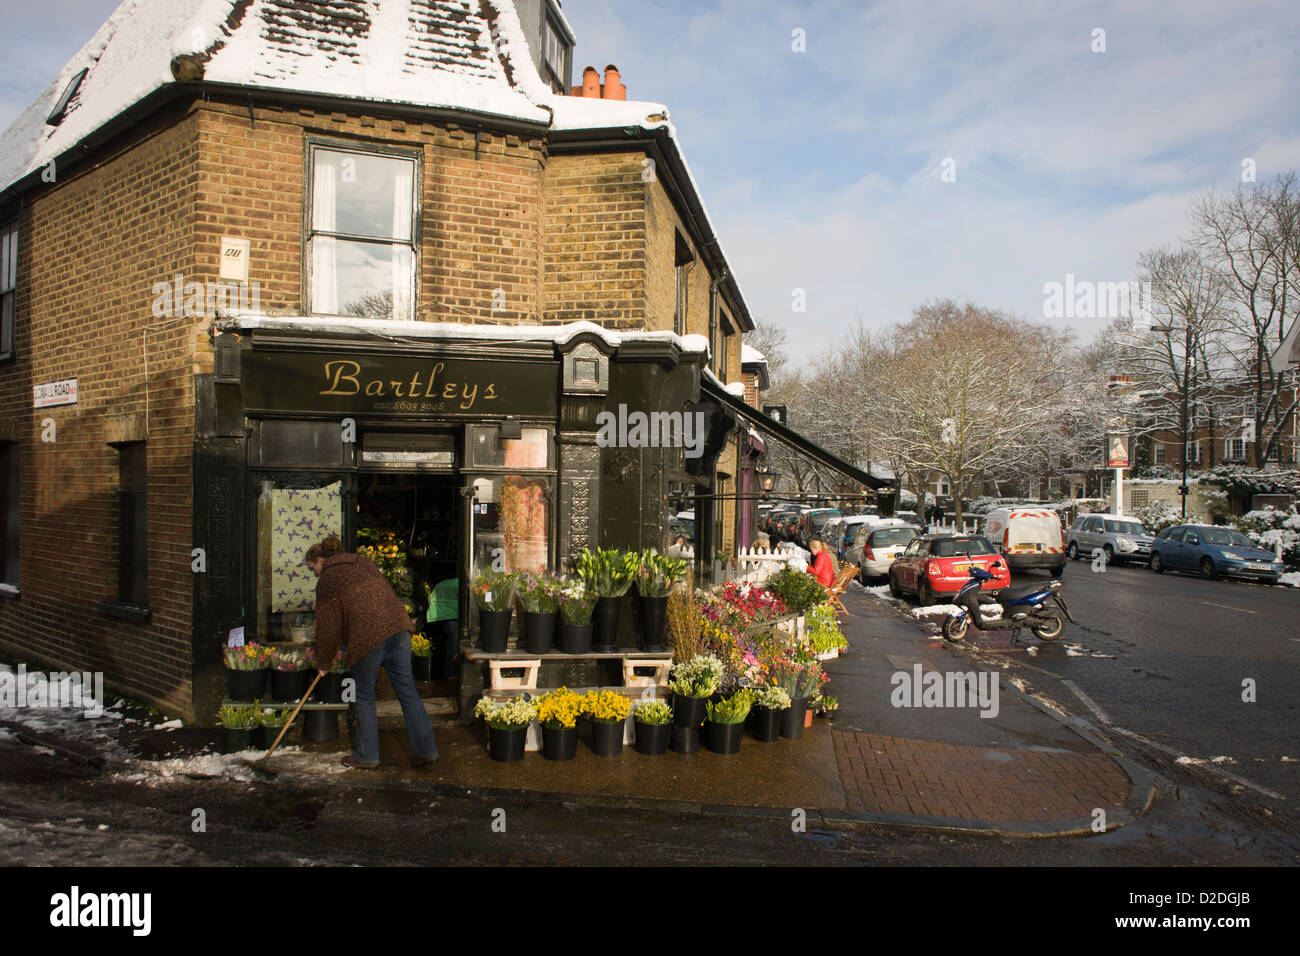 Employee of Bartleys the florist business in Dulwich Village, south London, brushes melting pavement snow. Stock Photo